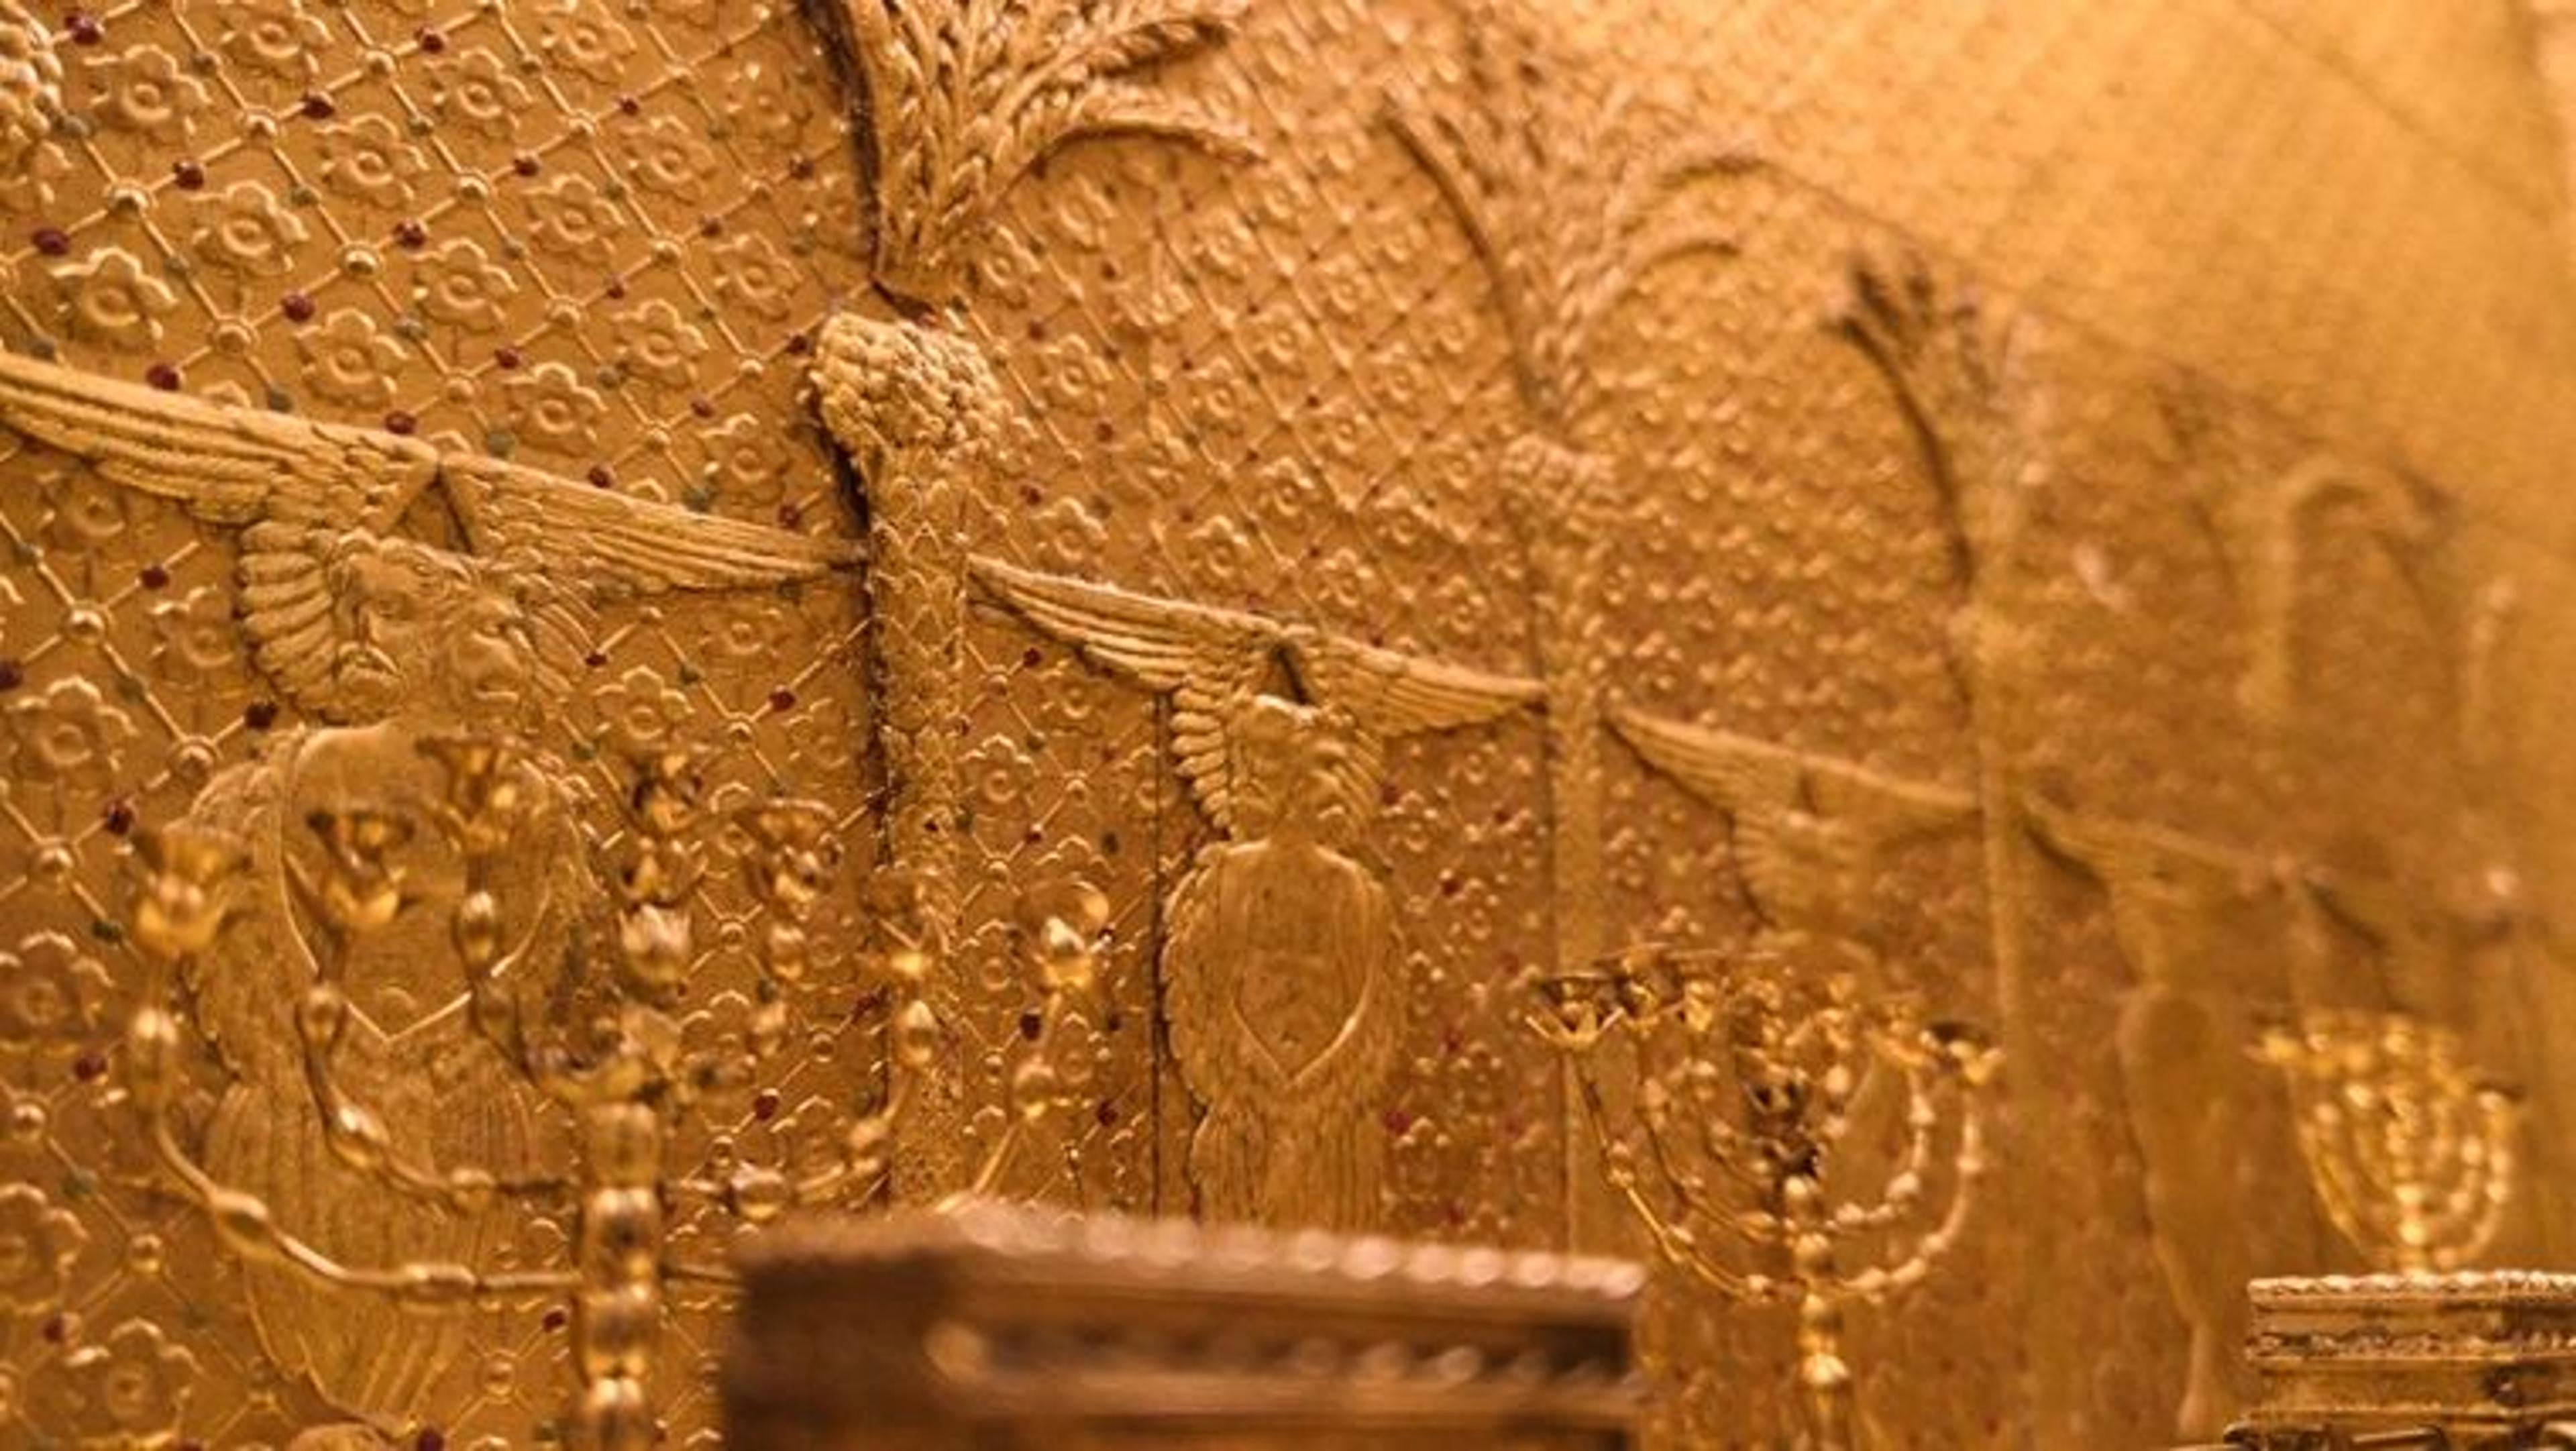 An ornate gold color wall in the interior of a miniature temple, with menorahs on two tables against the wall.